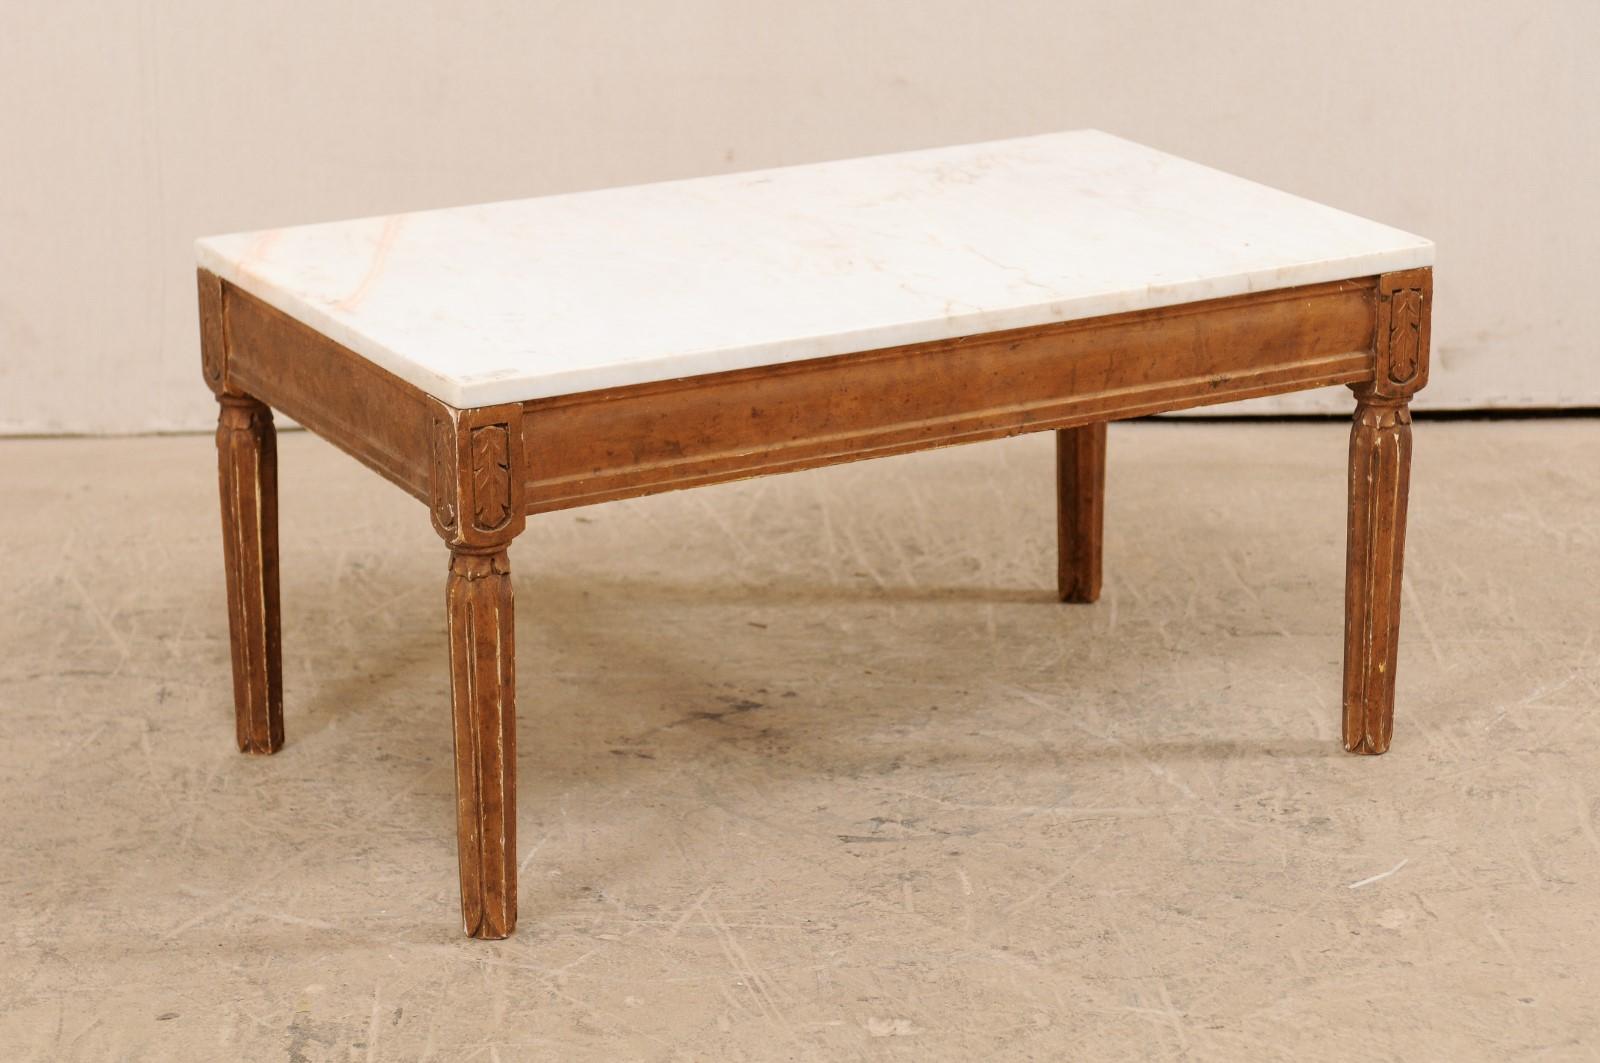 A Swedish coffee table with white marble top from the early 20th century. This antique table from Sweden features a rectangular-shaped white marble top which rests above a wood skirt, minimally adorn with straight trim and carved leaf accents at